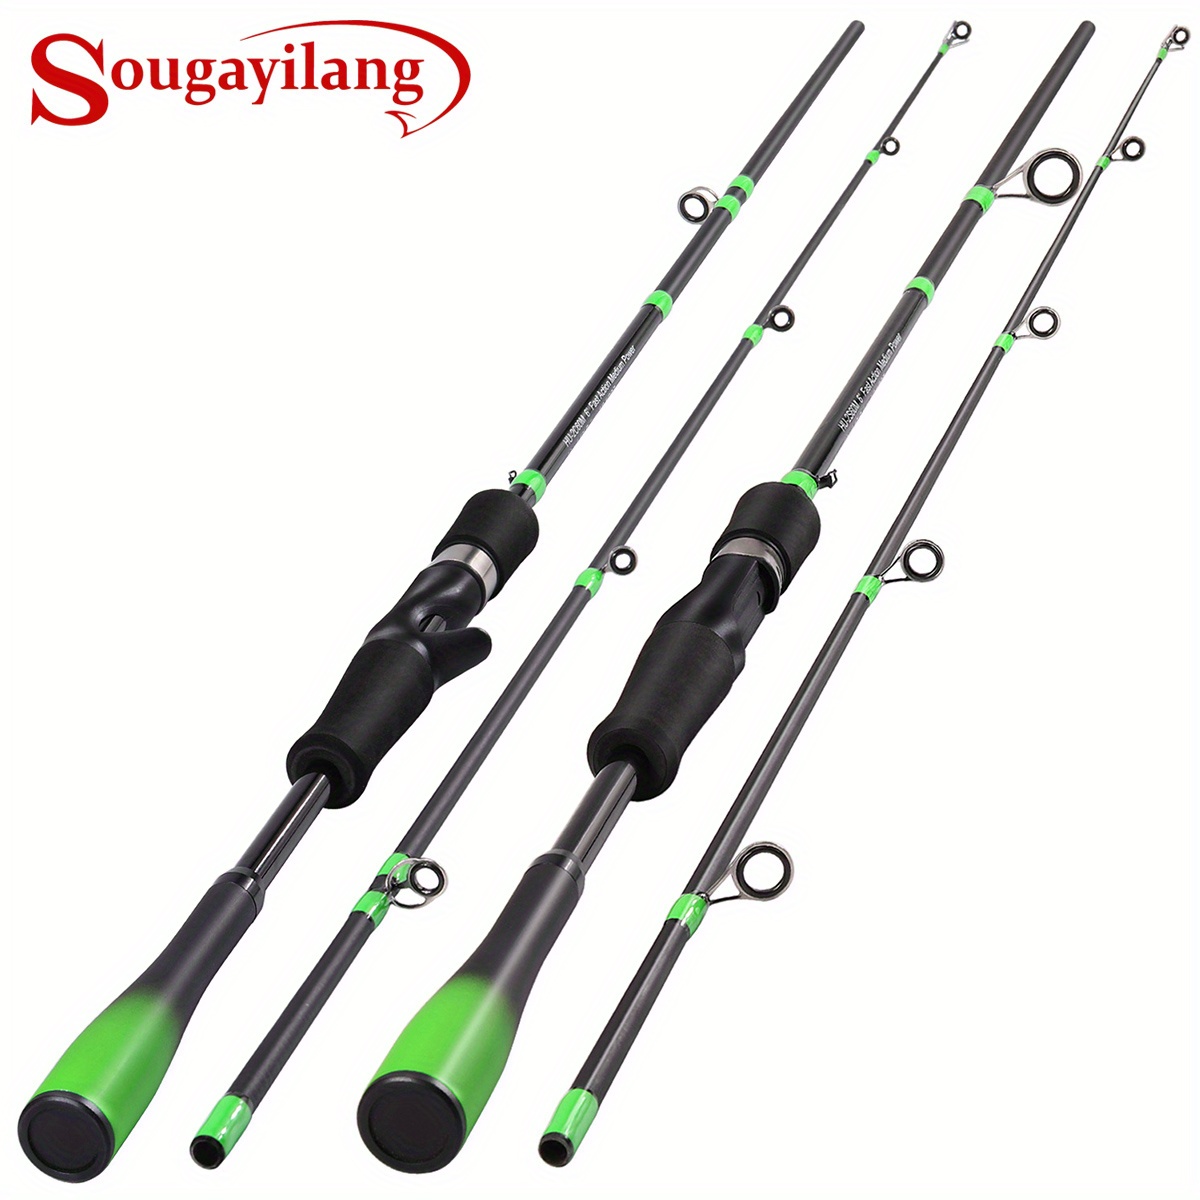 Sougayilang 1pc Portable 2 Sections Fishing Rod, 180cm/5.91ft  Spinning/Casting Rod With Comfortable Handle, Fishing Tackle For Freshwater